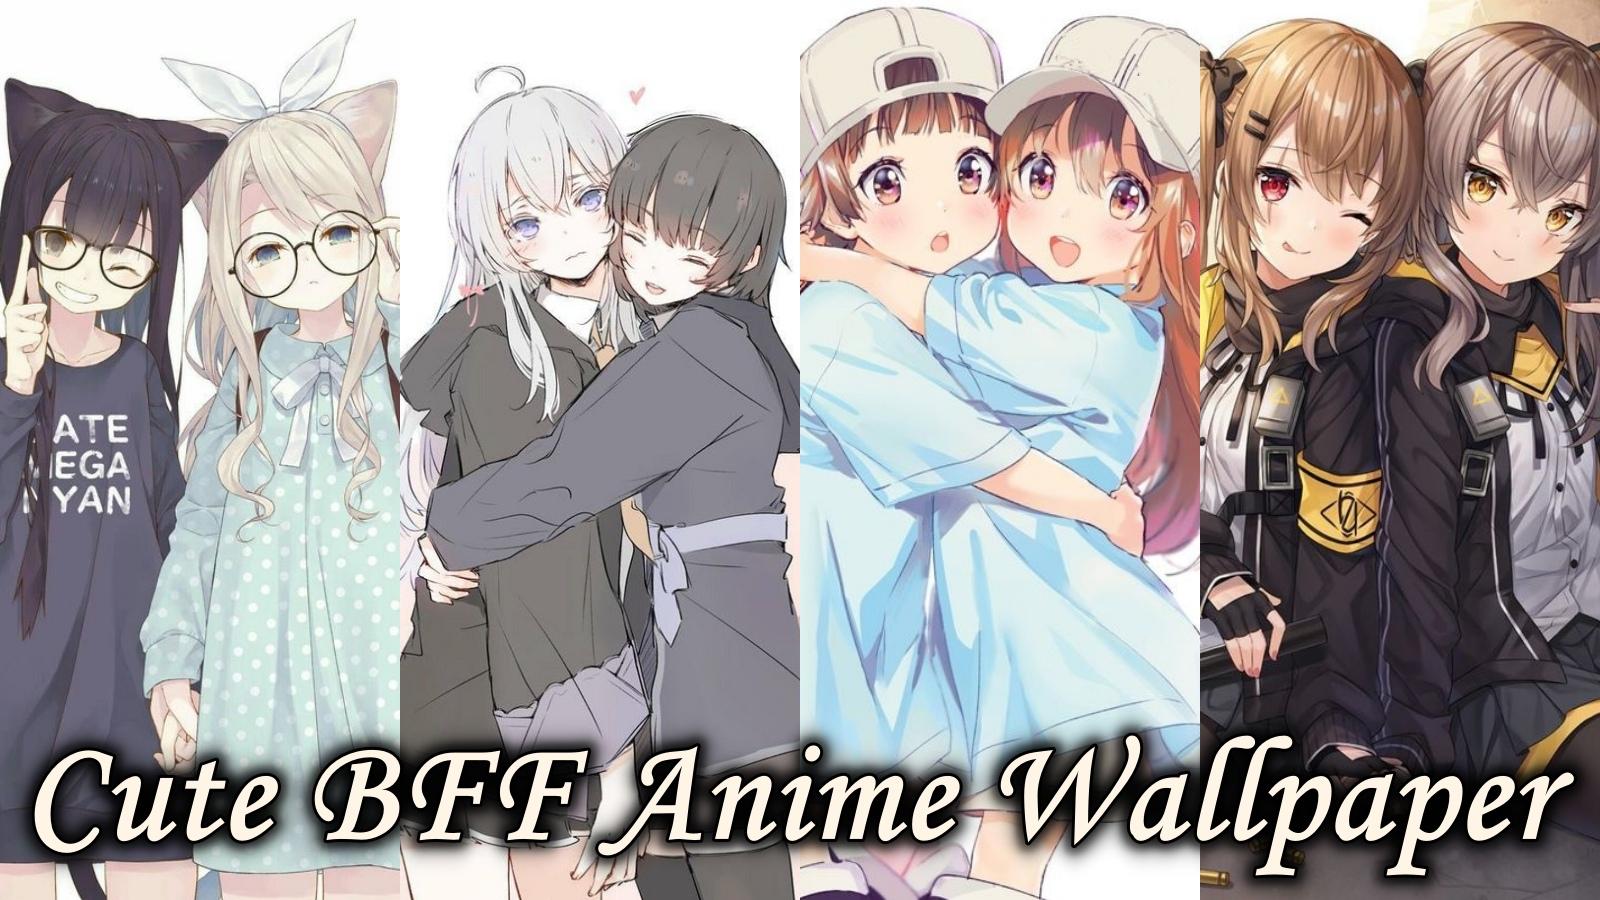 2 Anime Girl Best Friends, HD Png Download - kindpng